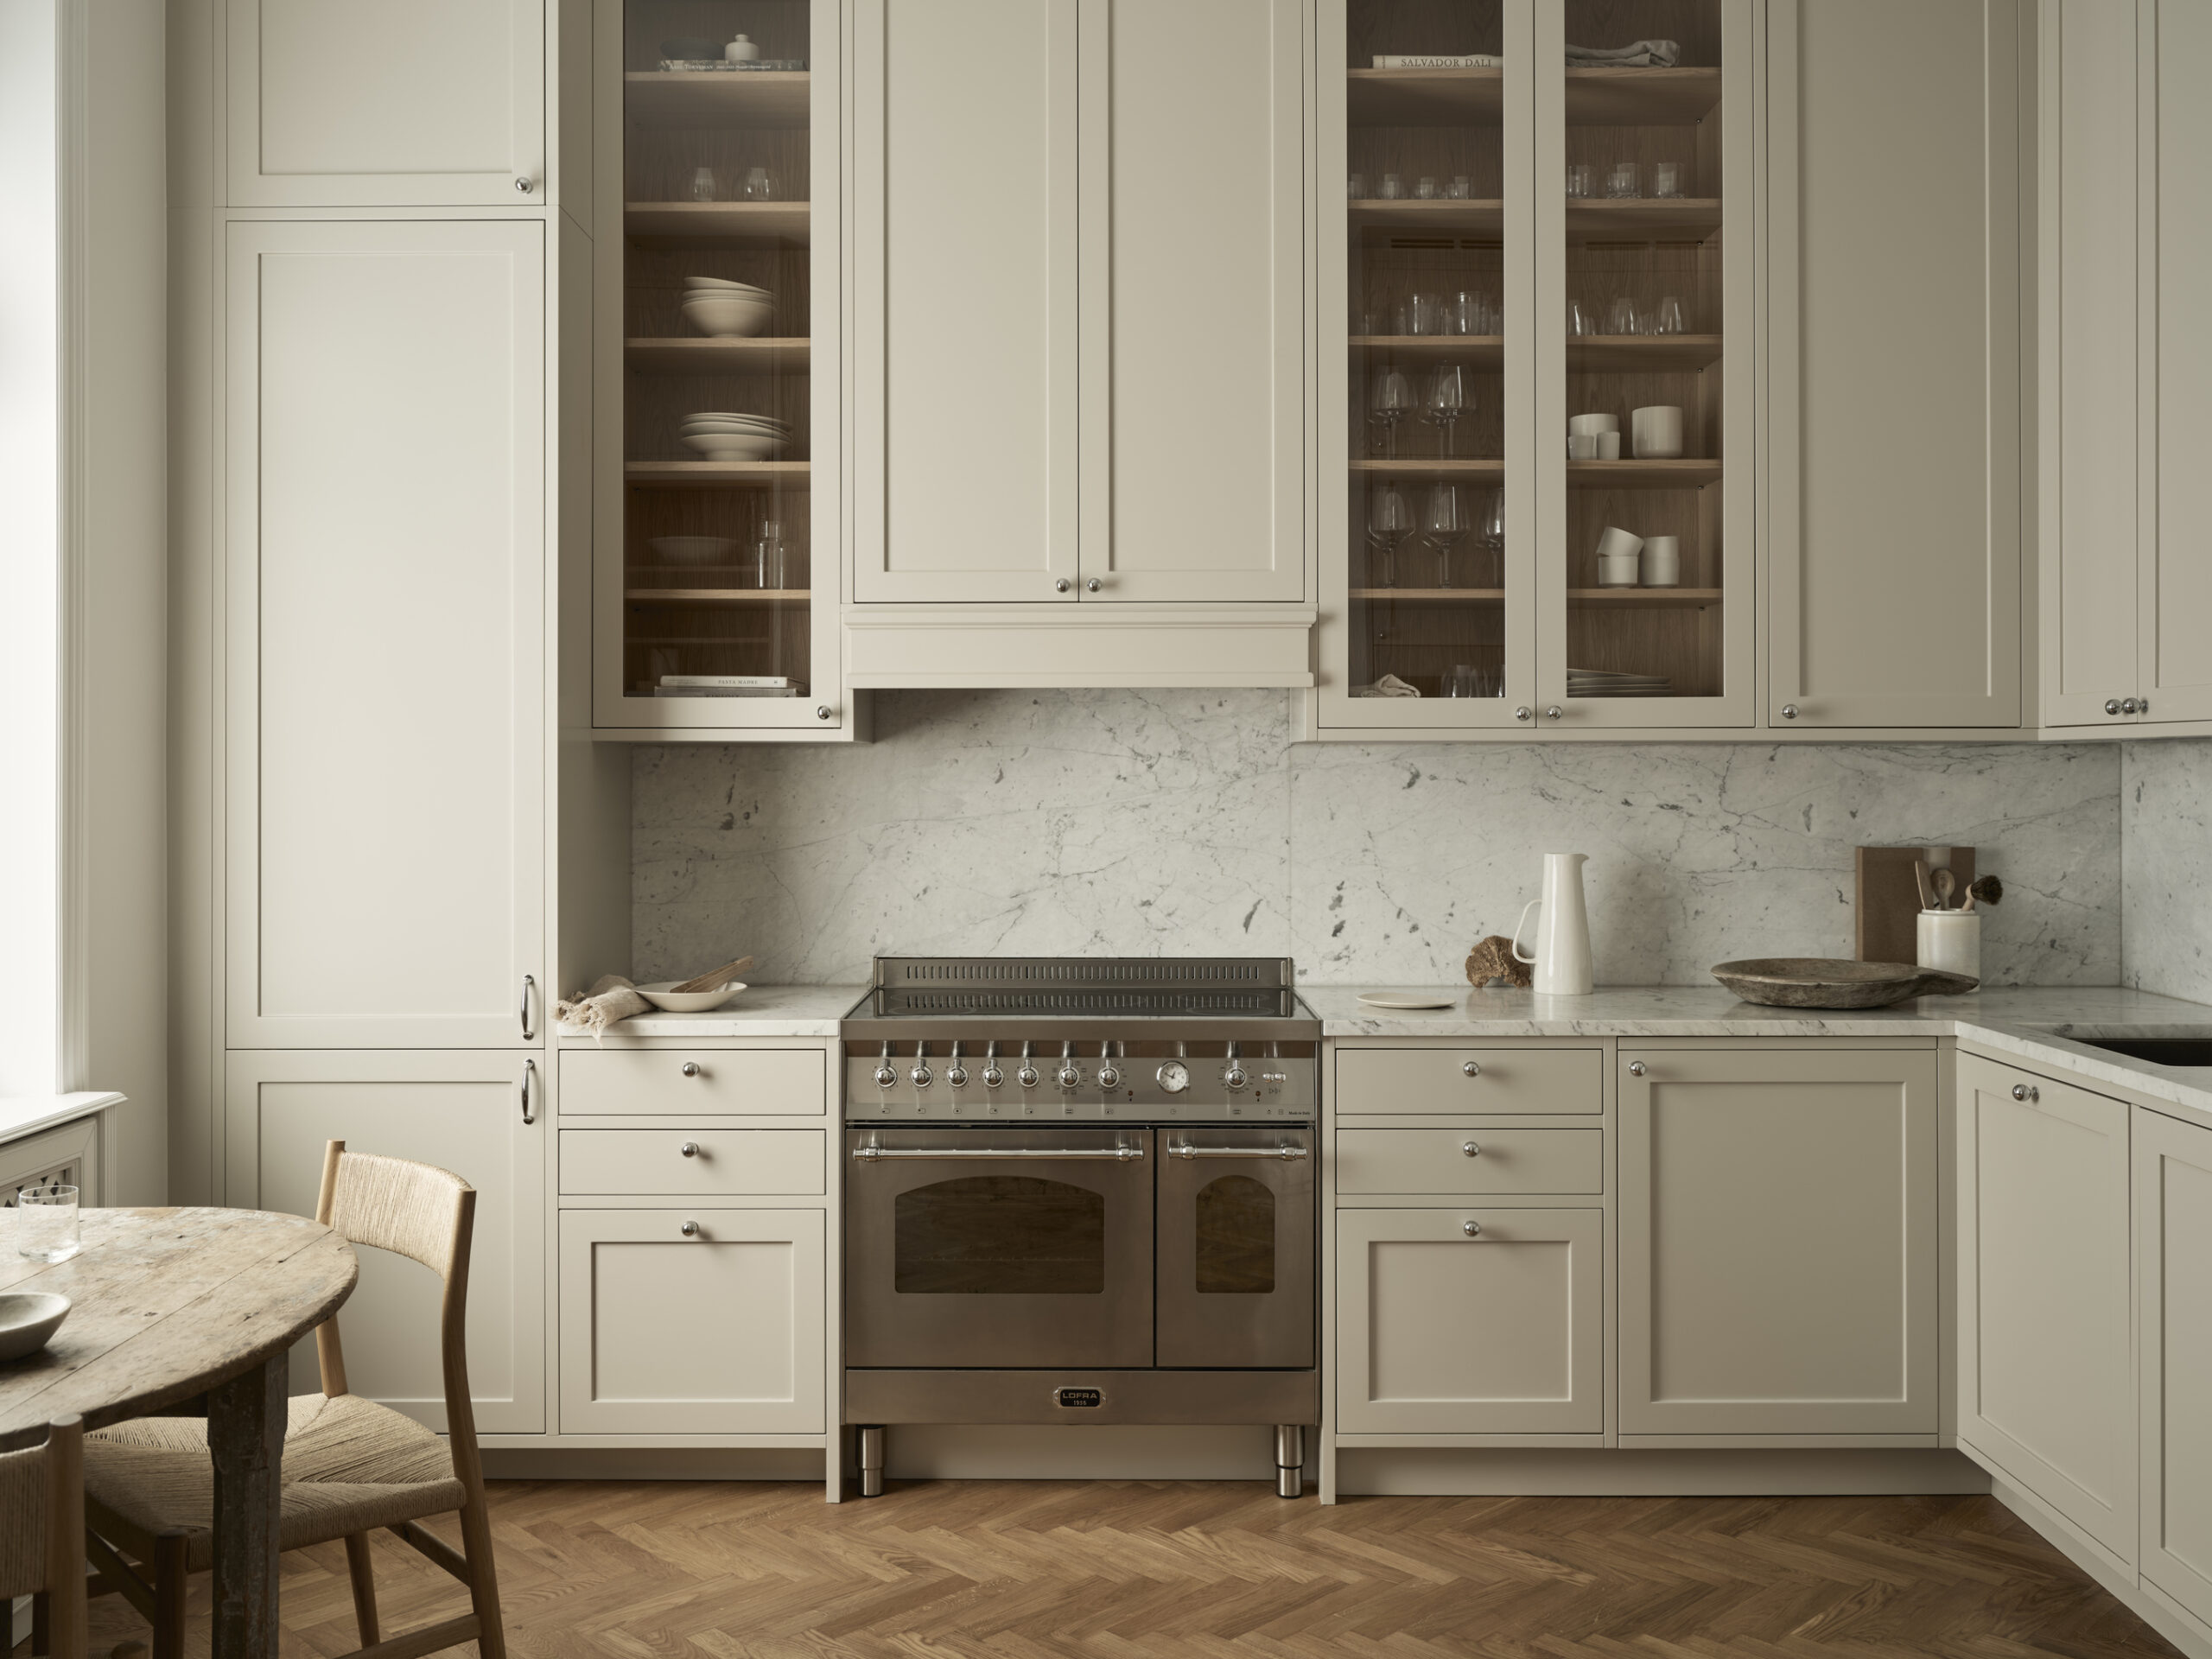 https://cocolapinedesign.com/wp-content/uploads/Timeless-kitchen-cabinet-colors-scaled.jpg